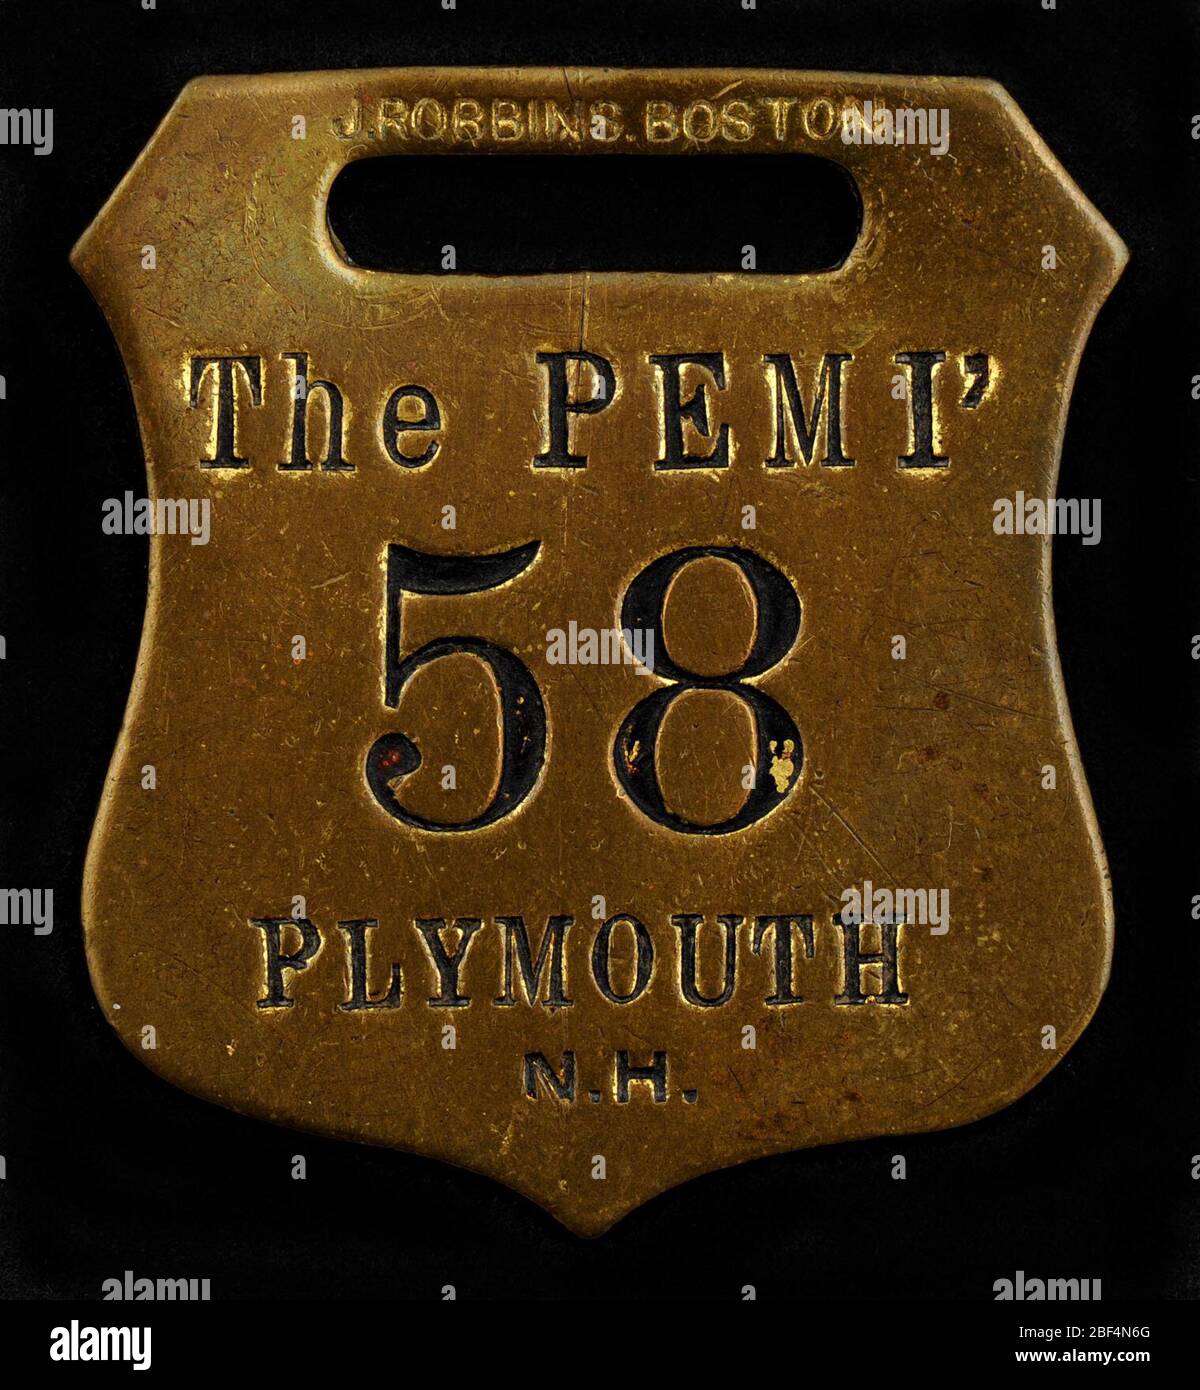 Plymouth New Hampshire Owney tag. This shield-shaped metal tag is marked “The Pemi, 58, Plymouth, NH.” The exact origin of this tag is unknown. It commemorated Owney’s trip to Plymouth, New Hampshire, and possibly a night’s stay at the city’s Pemi Hotel. Stock Photo